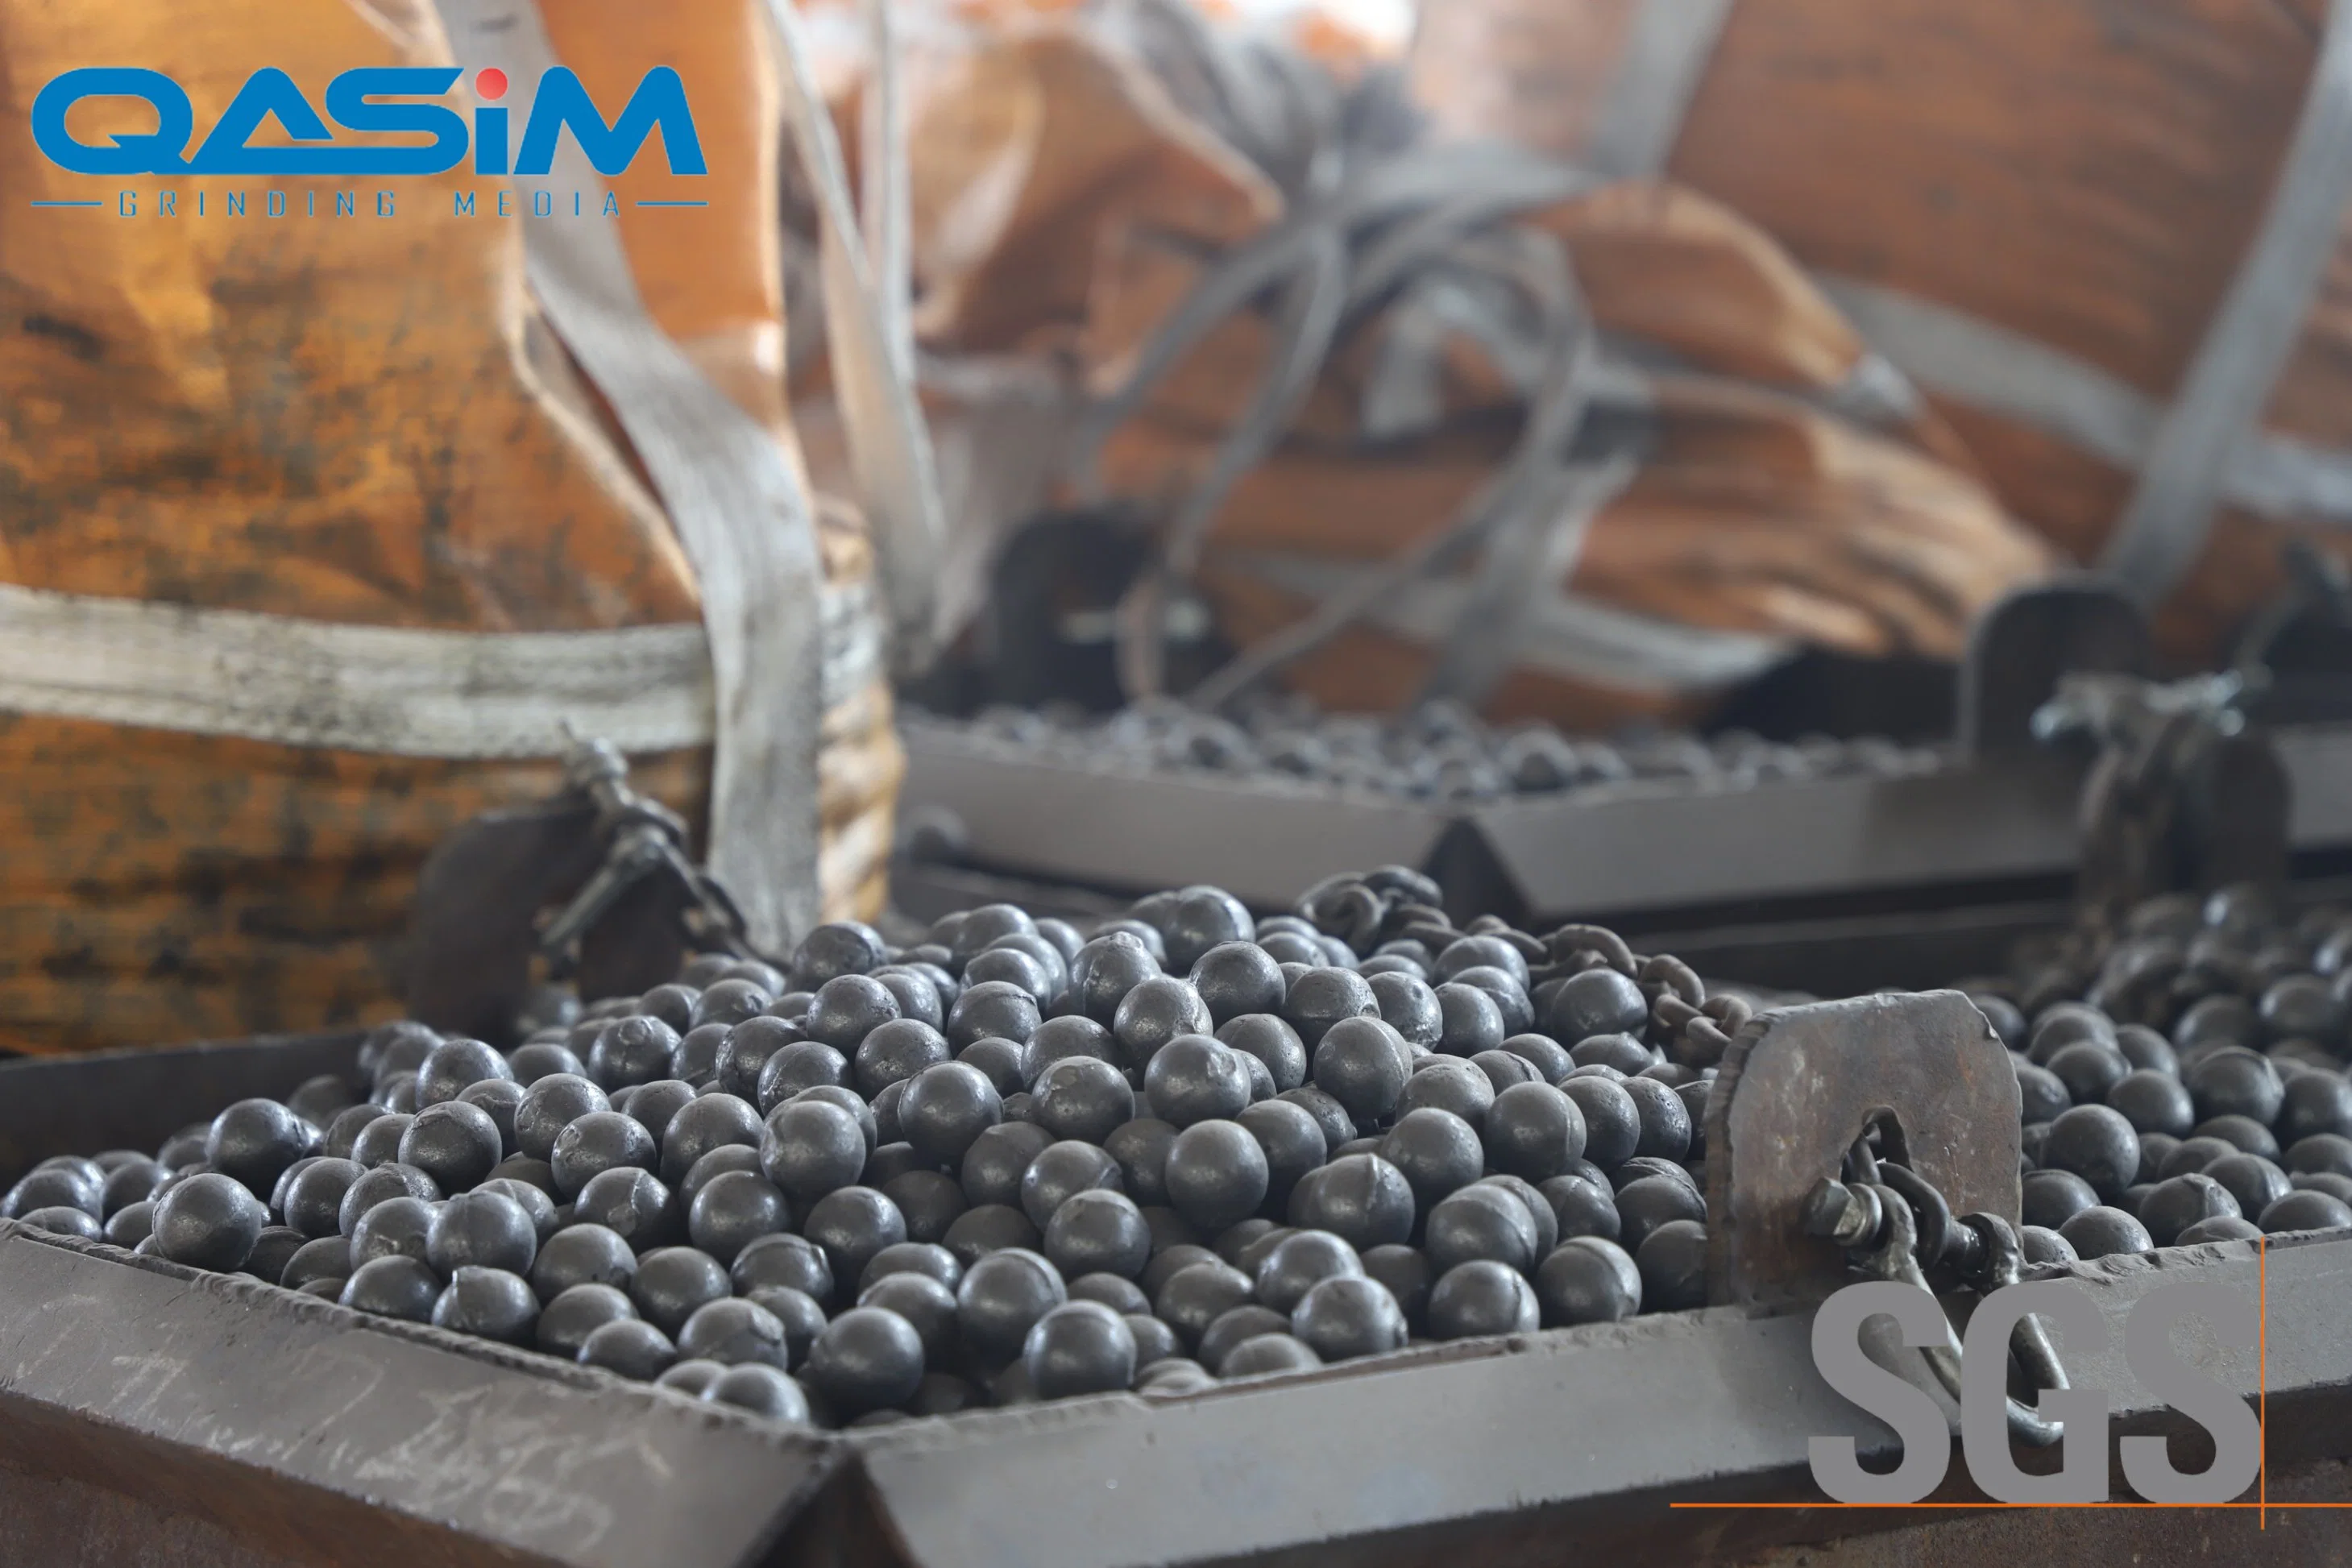 Cast Steel Ball Grinding Media for Raw Mill